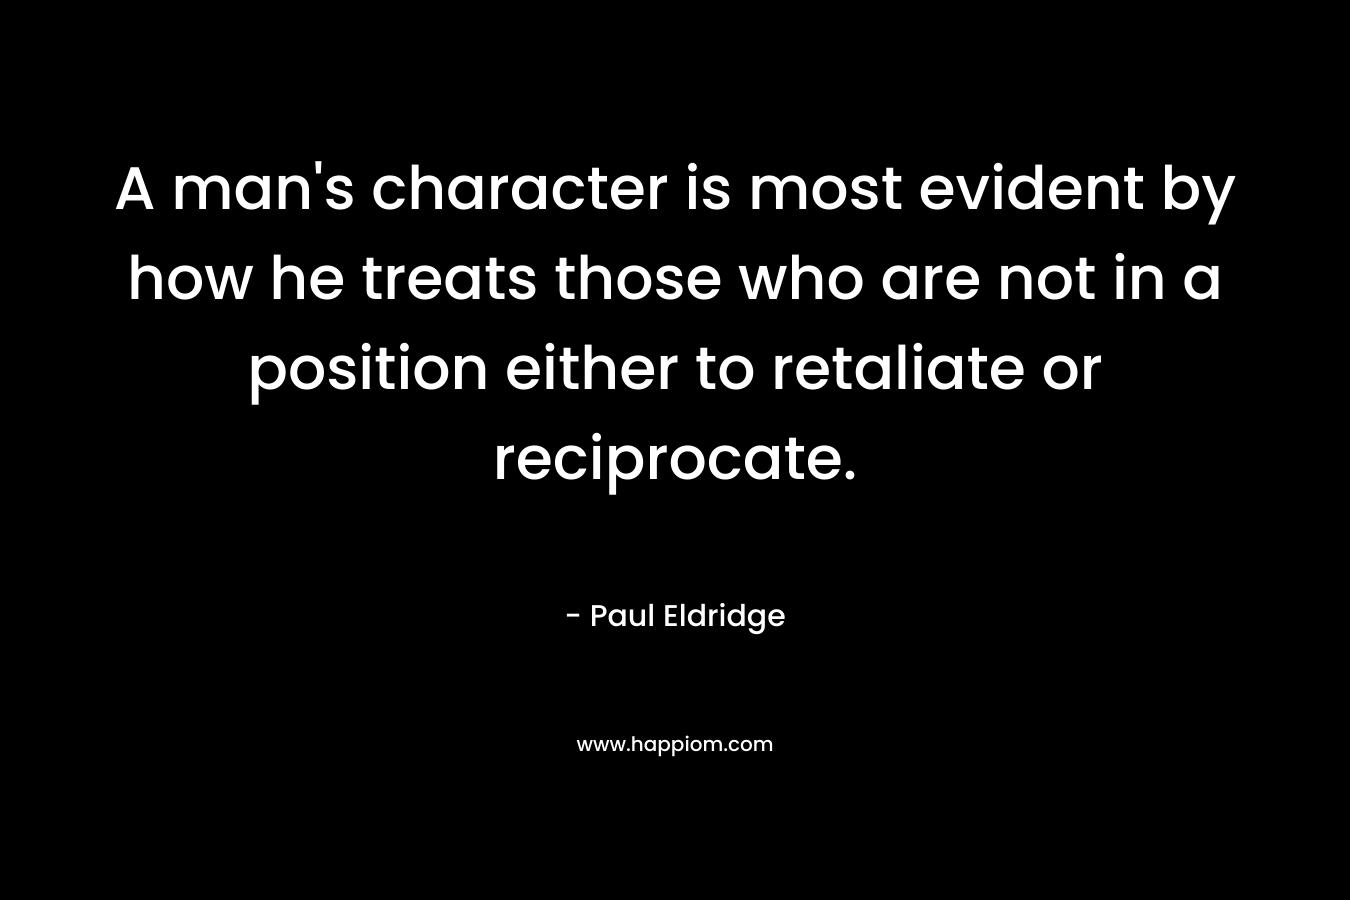 A man's character is most evident by how he treats those who are not in a position either to retaliate or reciprocate.